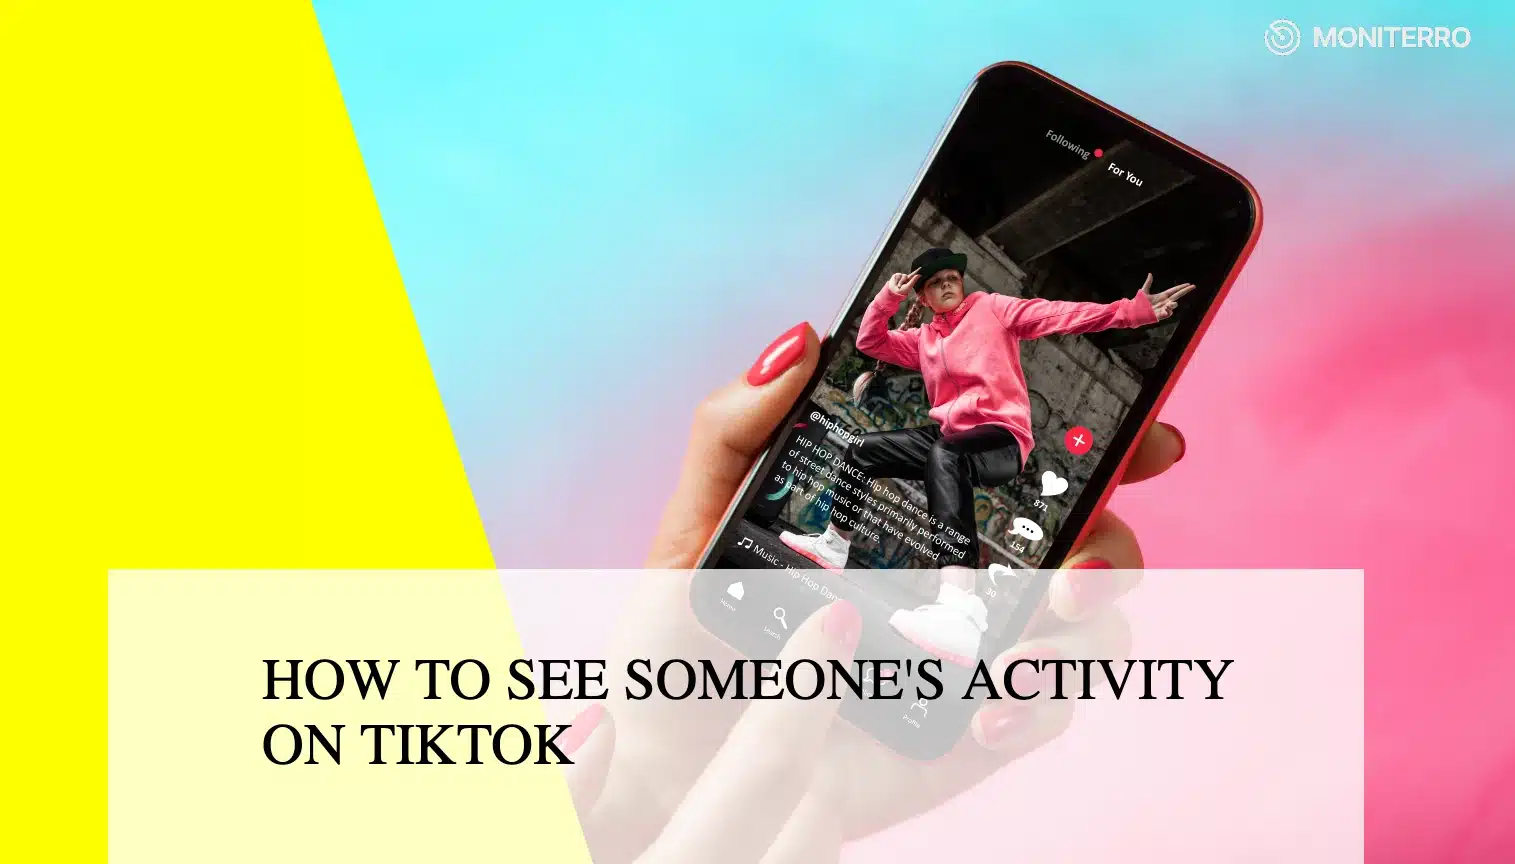 How to See Someone's Activity on TikTok